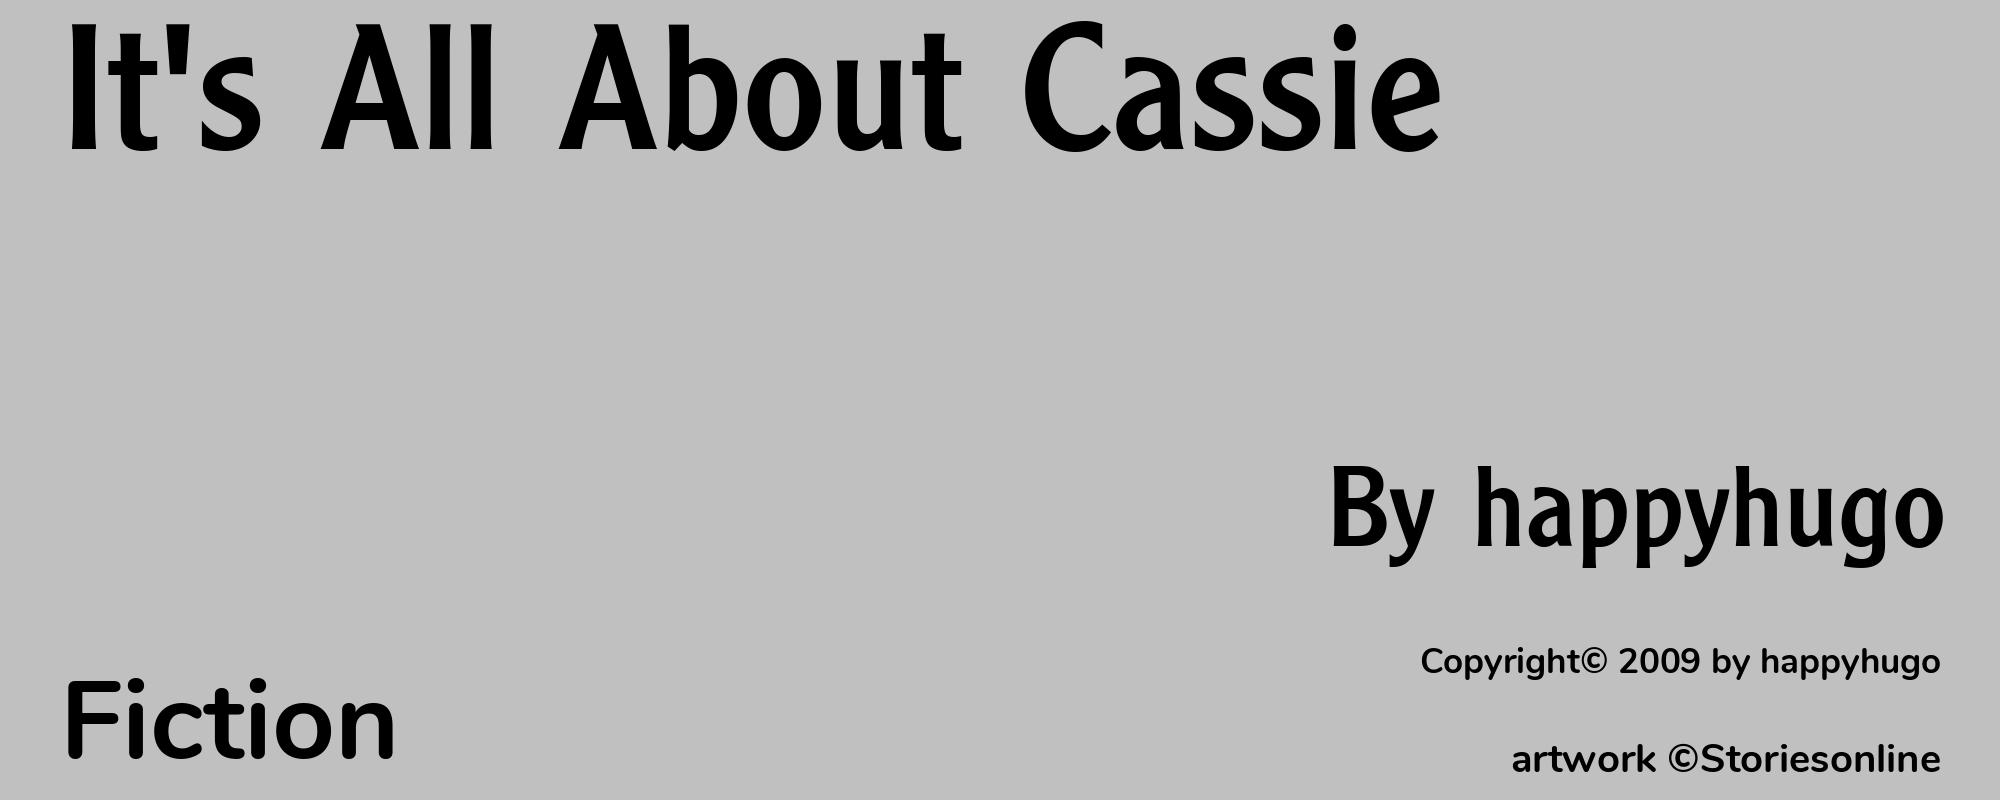 It's All About Cassie - Cover